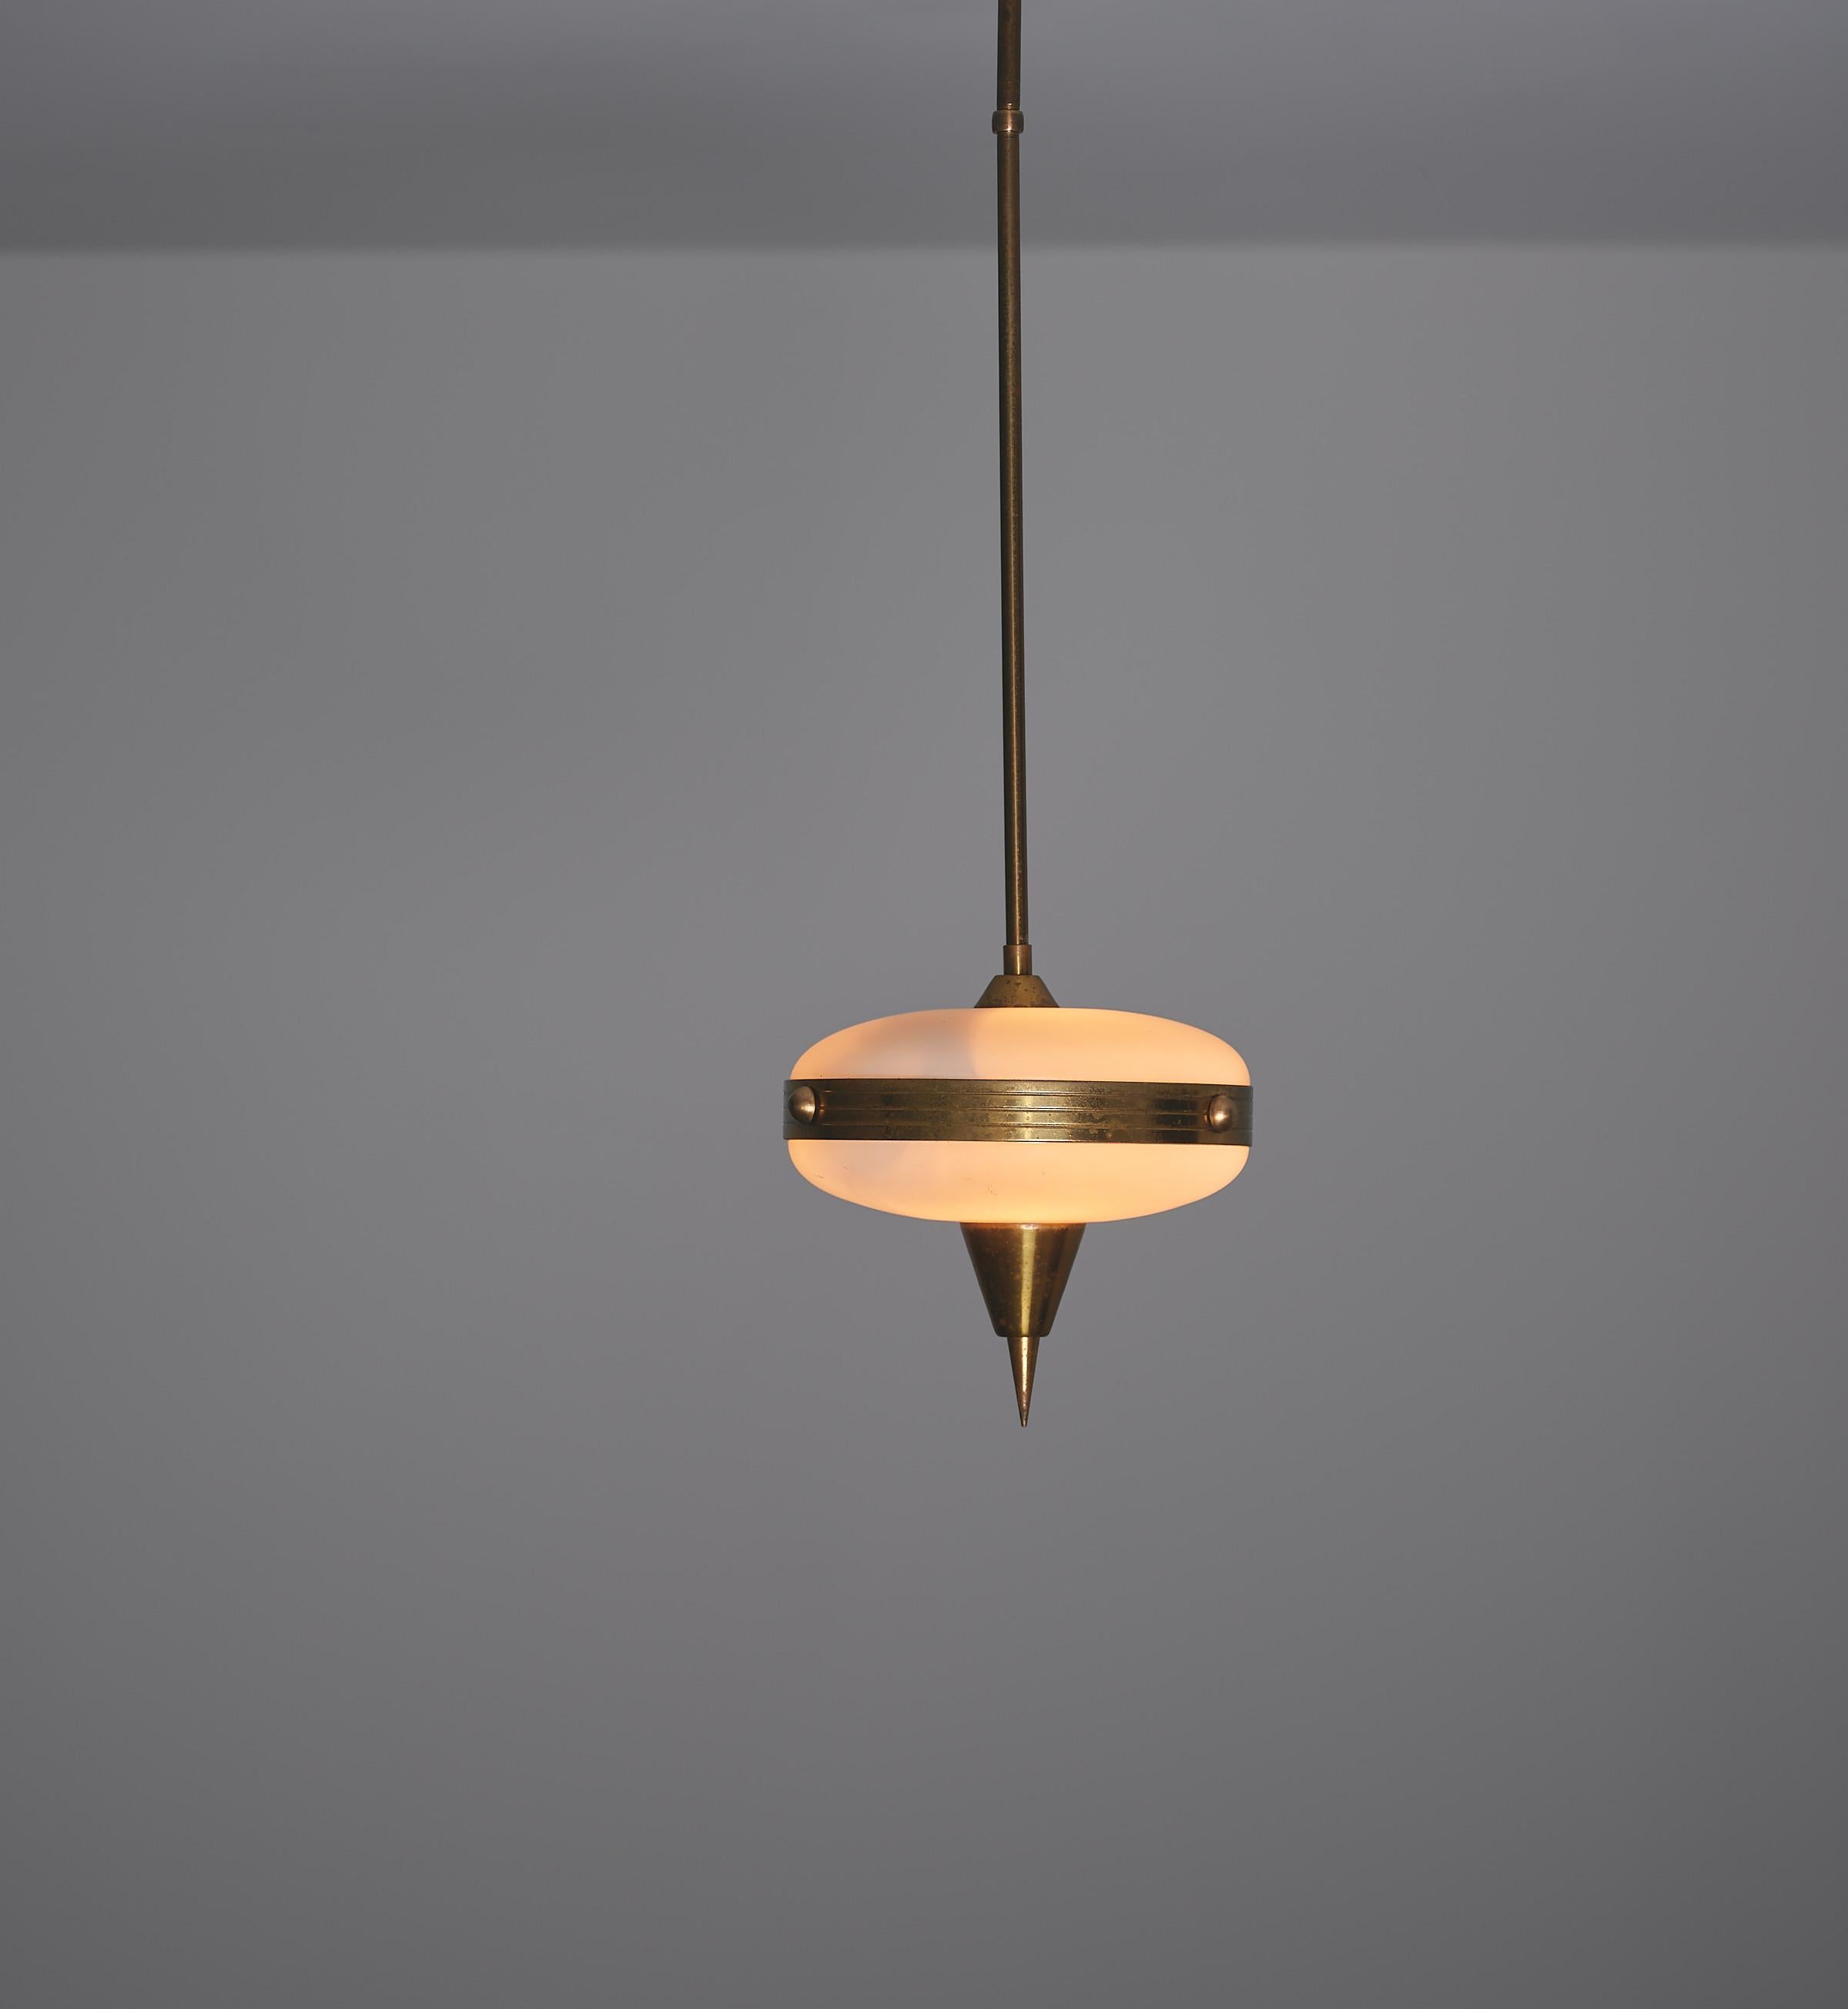 This elegant and stylish pendant lamp, produced in Italy in the 1950s, combines sleek modernist design with the warmth of vintage materials. Its petite form is crafted from brass, which features a lovely, natural patina developed over time, adding